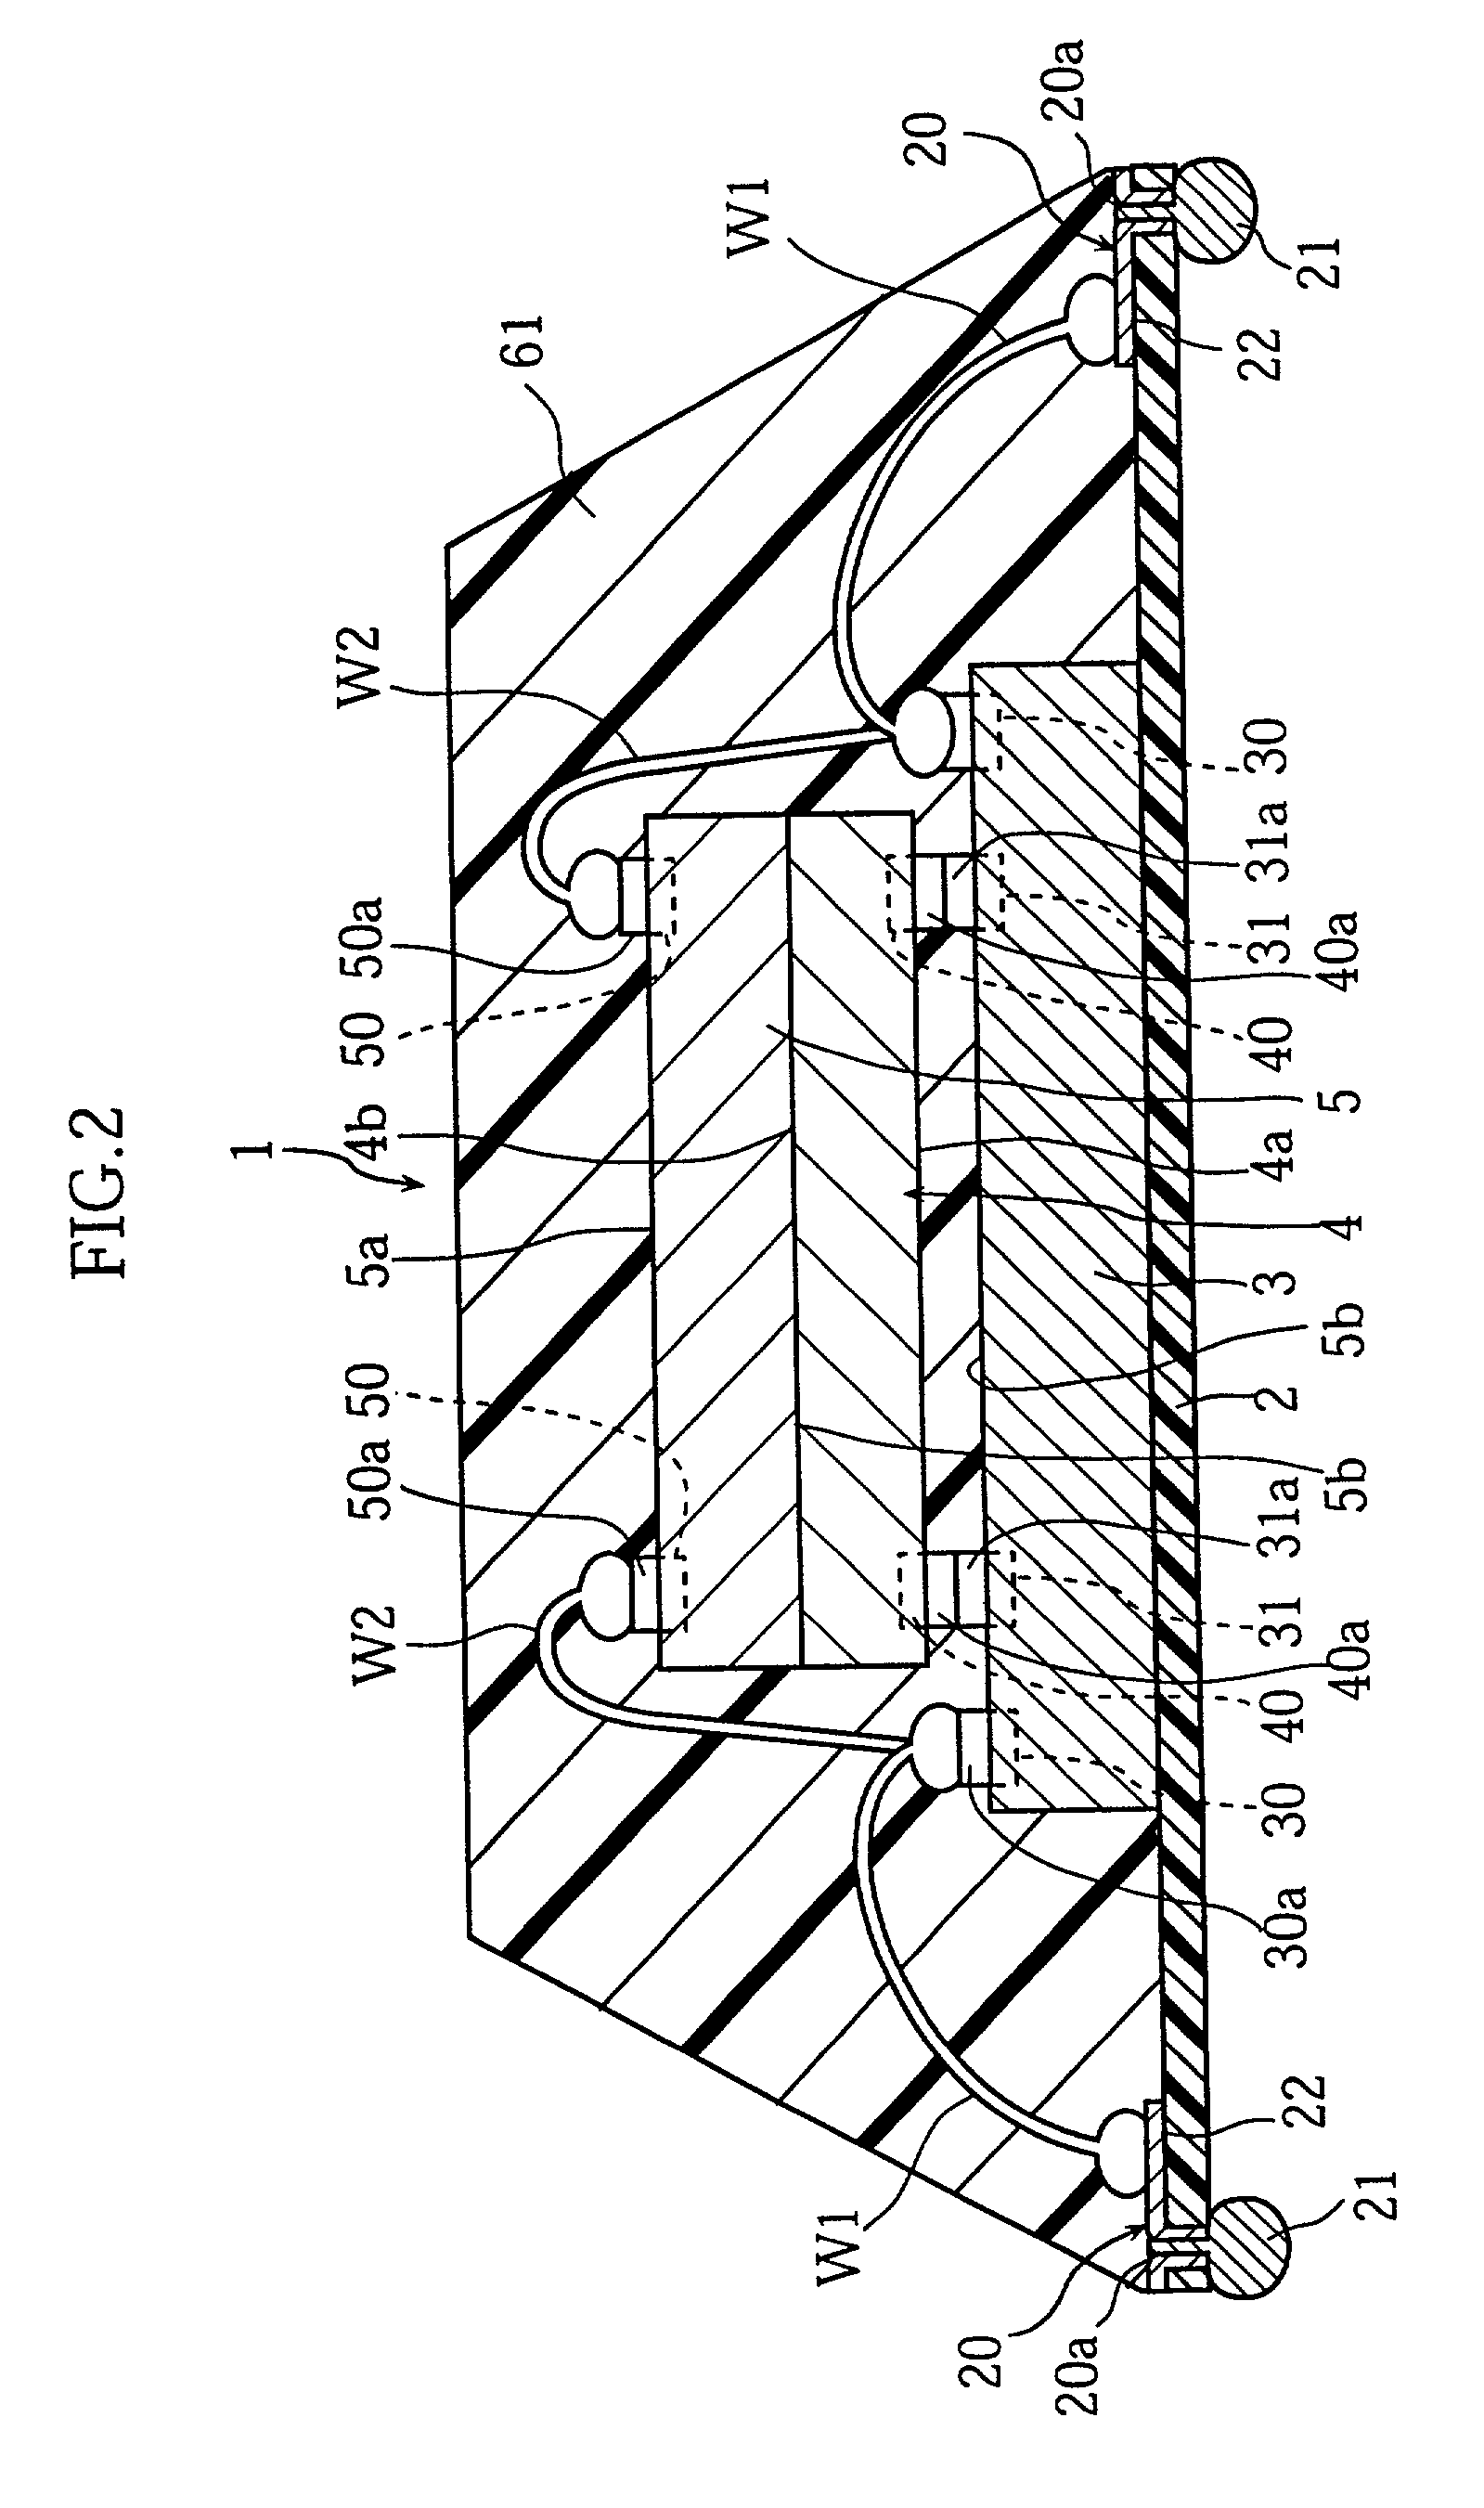 Semiconductor device and method for making the same